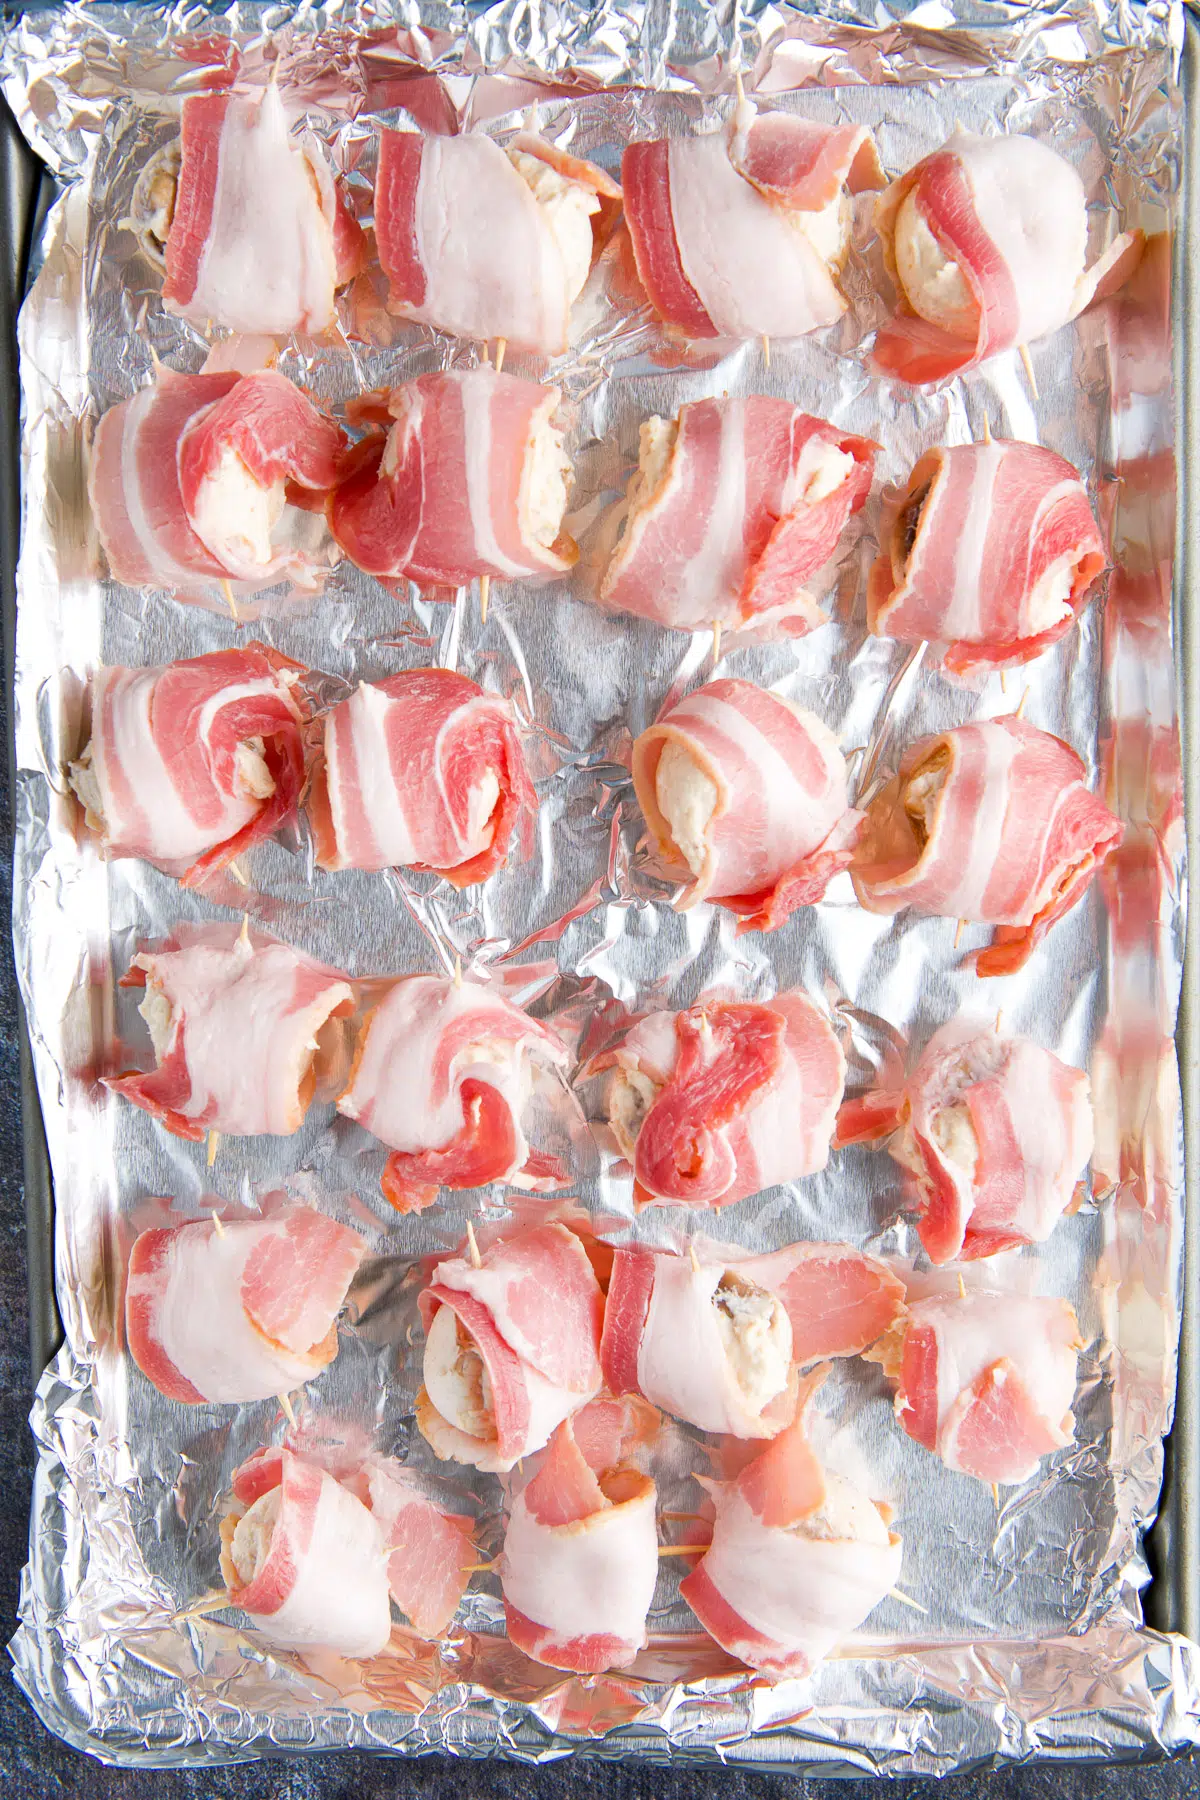 a foil lined pan with bacon wrapped around mushrooms